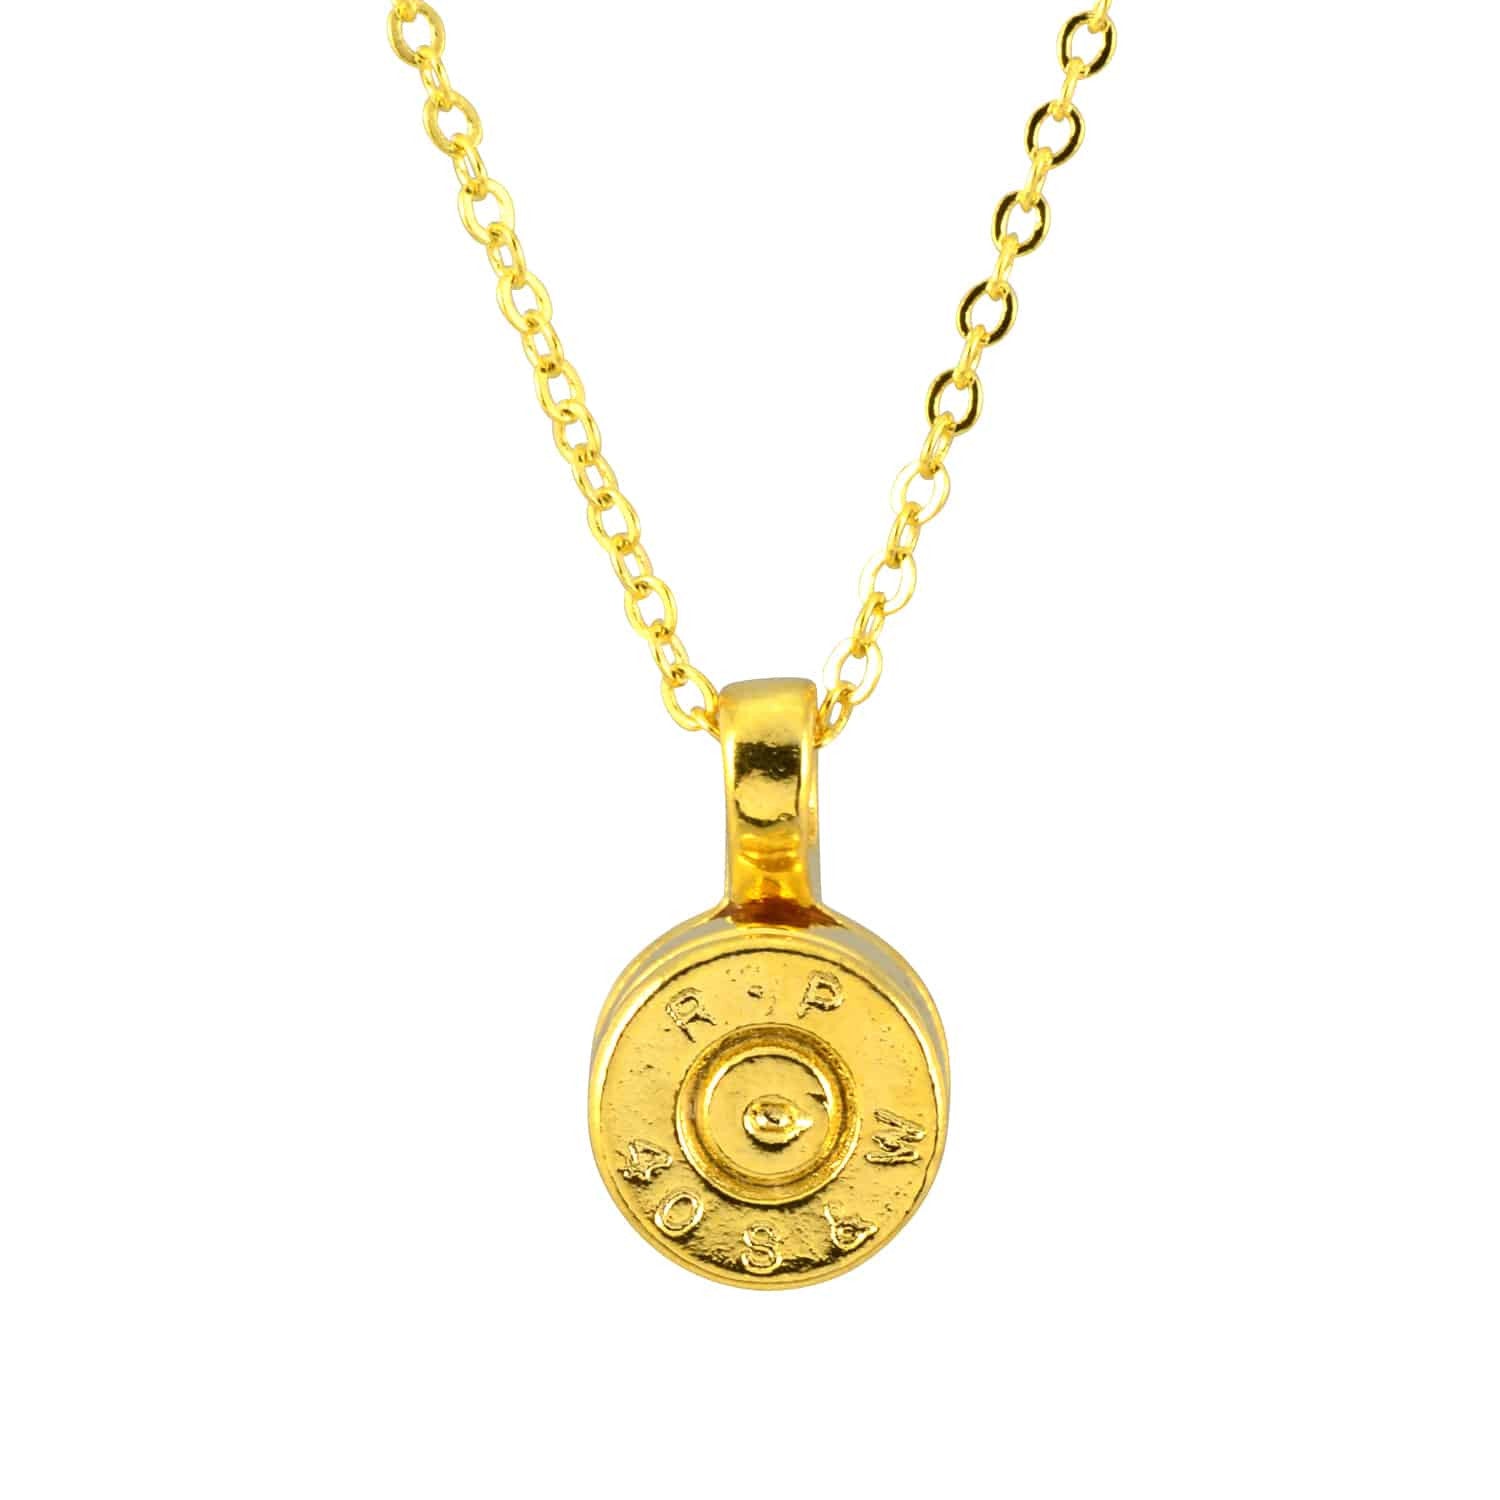 Lizzy Js Bullet Shell Pendant Necklace, Gold Plated Round